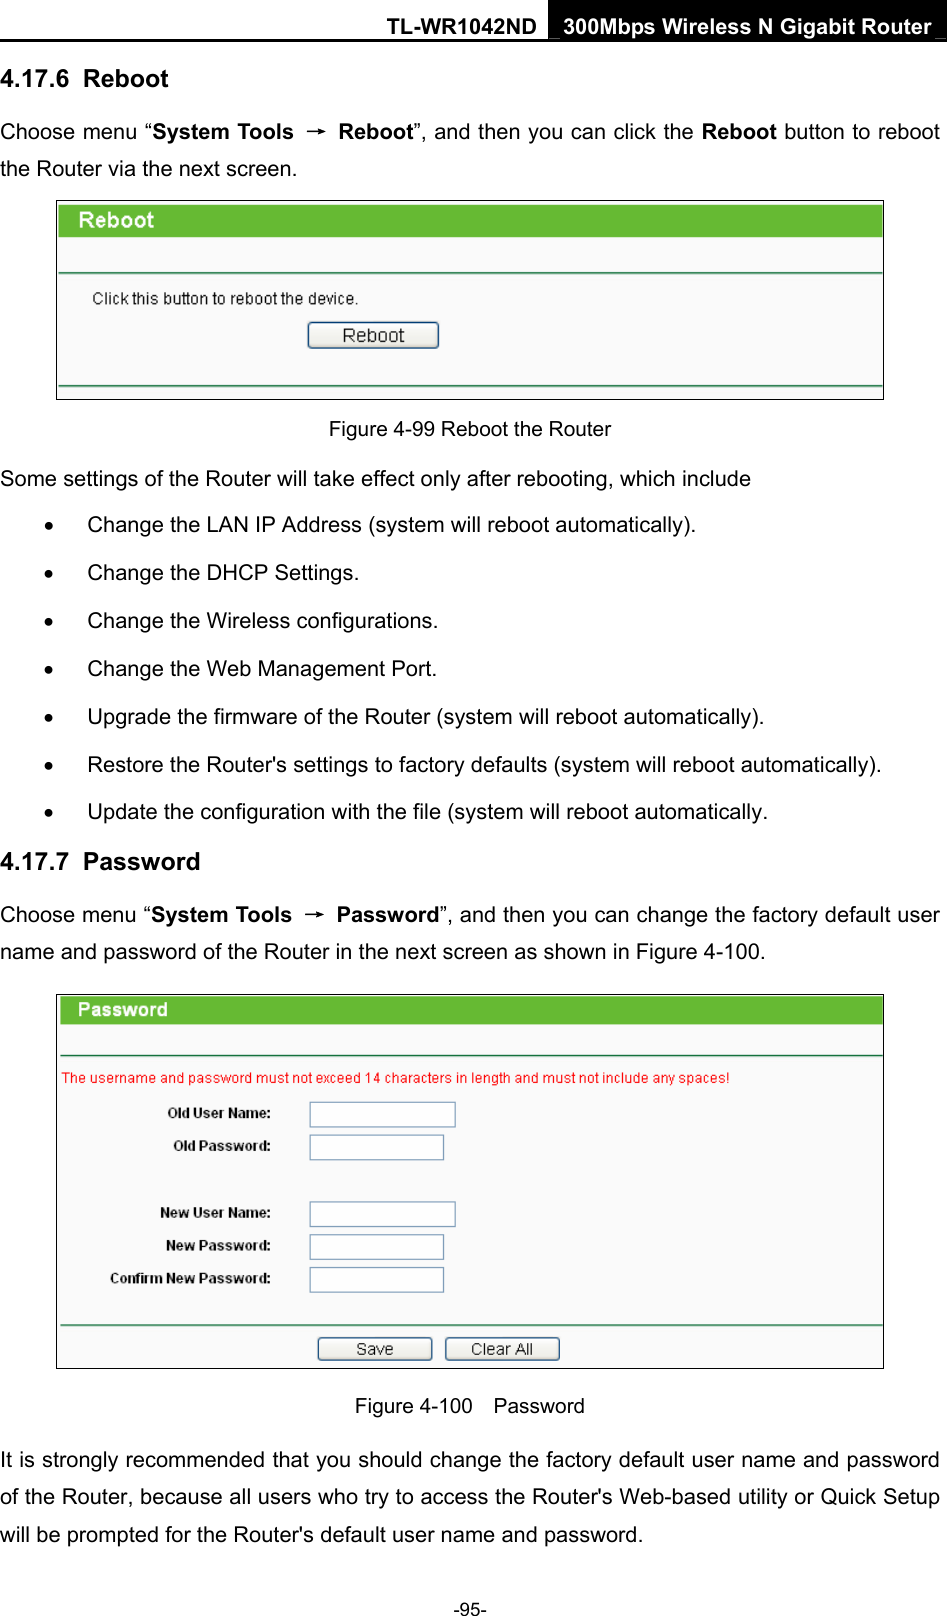 TL-WR1042ND 300Mbps Wireless N Gigabit Router -95- 4.17.6  Reboot Choose menu “System Tools  → Reboot”, and then you can click the Reboot button to reboot the Router via the next screen.  Figure 4-99 Reboot the Router Some settings of the Router will take effect only after rebooting, which include •  Change the LAN IP Address (system will reboot automatically). •  Change the DHCP Settings. •  Change the Wireless configurations. •  Change the Web Management Port. •  Upgrade the firmware of the Router (system will reboot automatically). •  Restore the Router&apos;s settings to factory defaults (system will reboot automatically). •  Update the configuration with the file (system will reboot automatically. 4.17.7  Password Choose menu “System Tools  → Password”, and then you can change the factory default user name and password of the Router in the next screen as shown in Figure 4-100.  Figure 4-100  Password It is strongly recommended that you should change the factory default user name and password of the Router, because all users who try to access the Router&apos;s Web-based utility or Quick Setup will be prompted for the Router&apos;s default user name and password. 